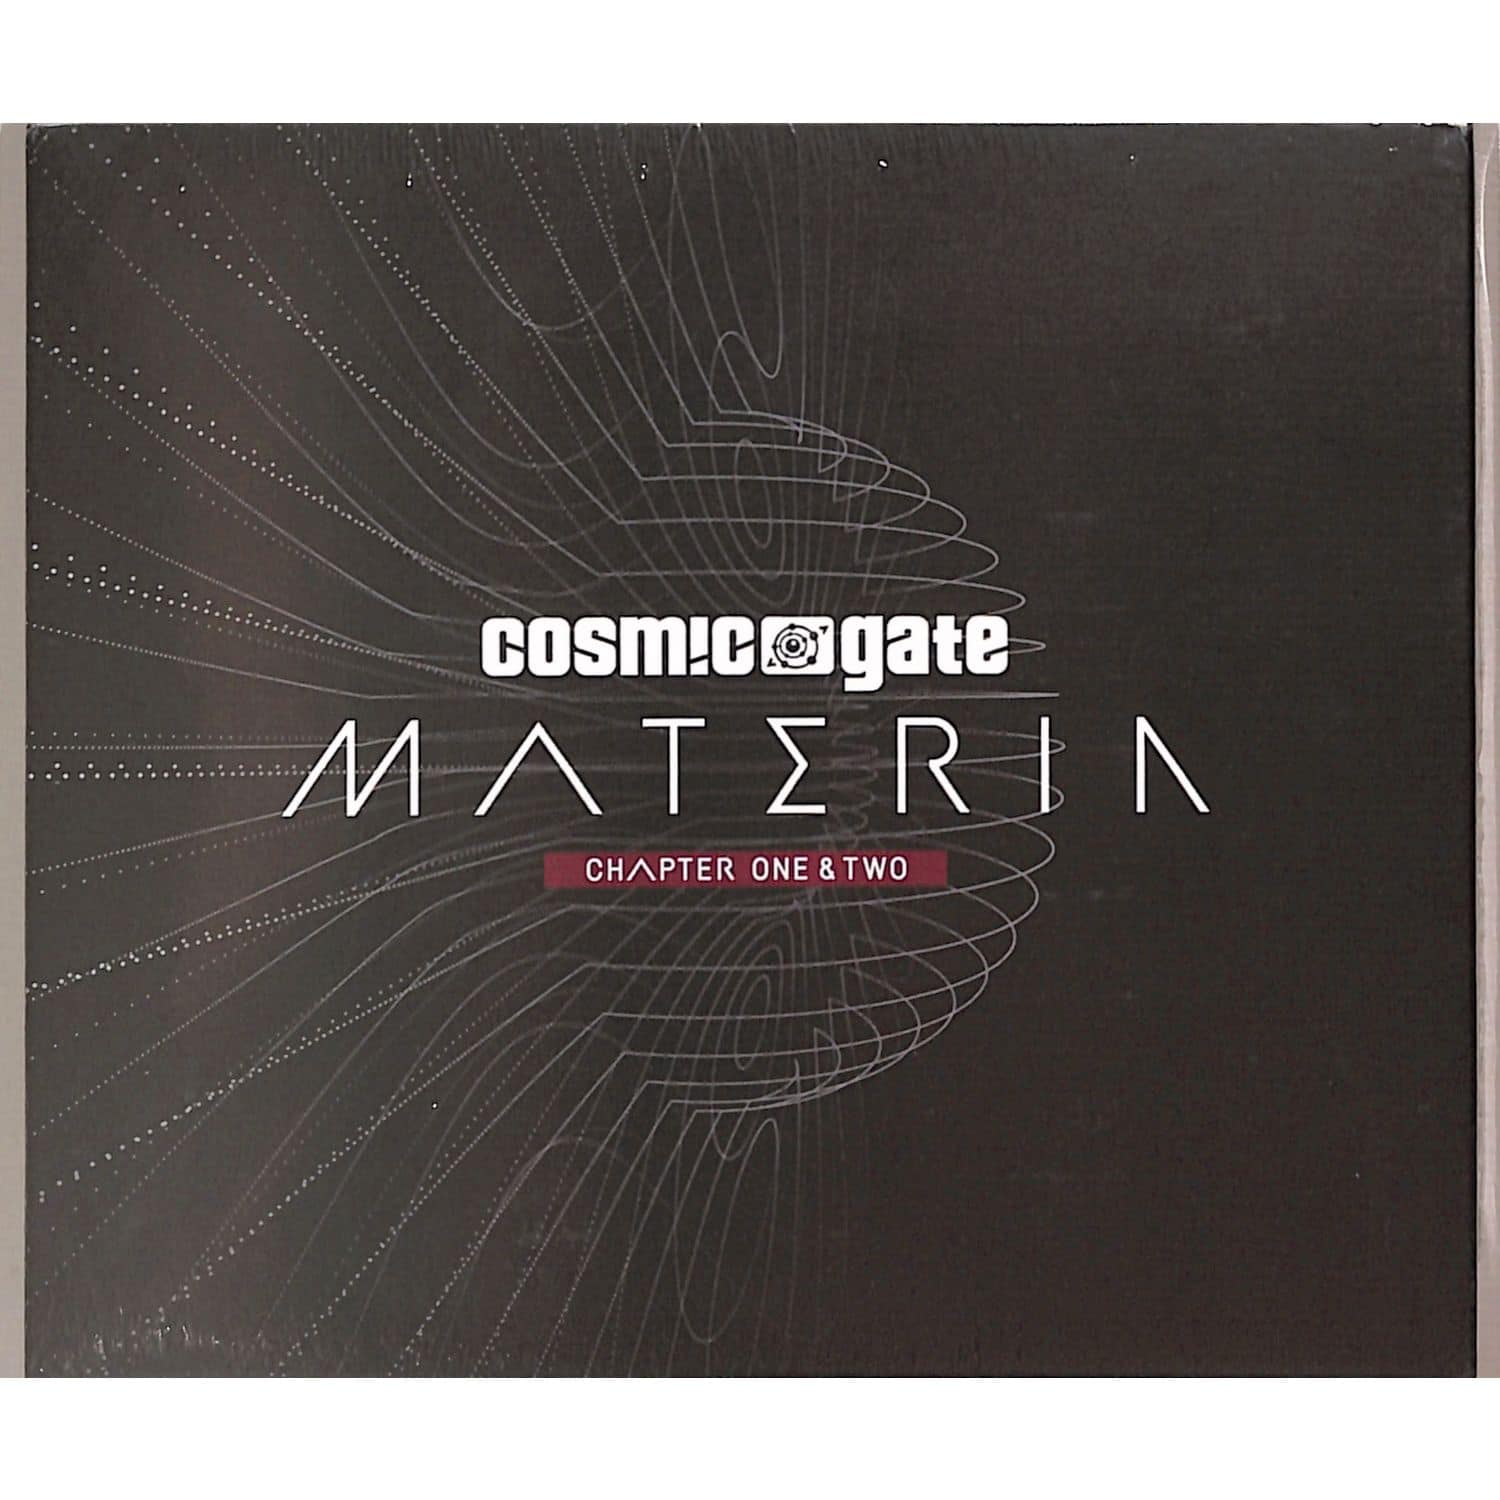 Cosmic Gate - MATERIA - CHAPTER ONE & TWO 